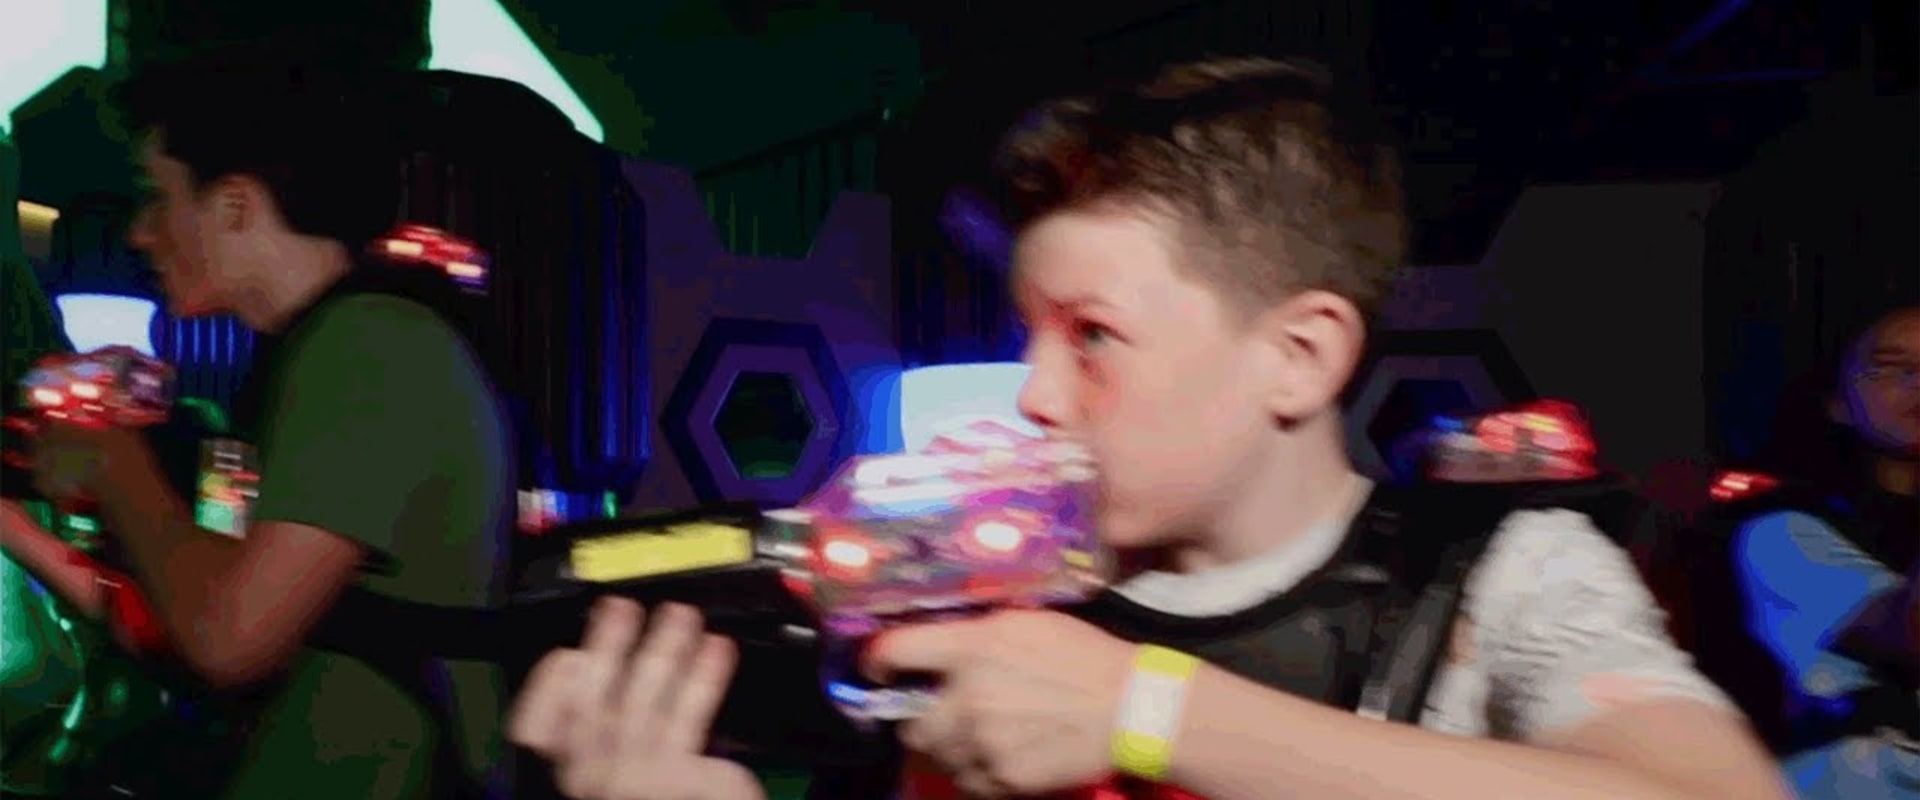 Laser Tag: An In-Depth Look at the Fun Family Activity